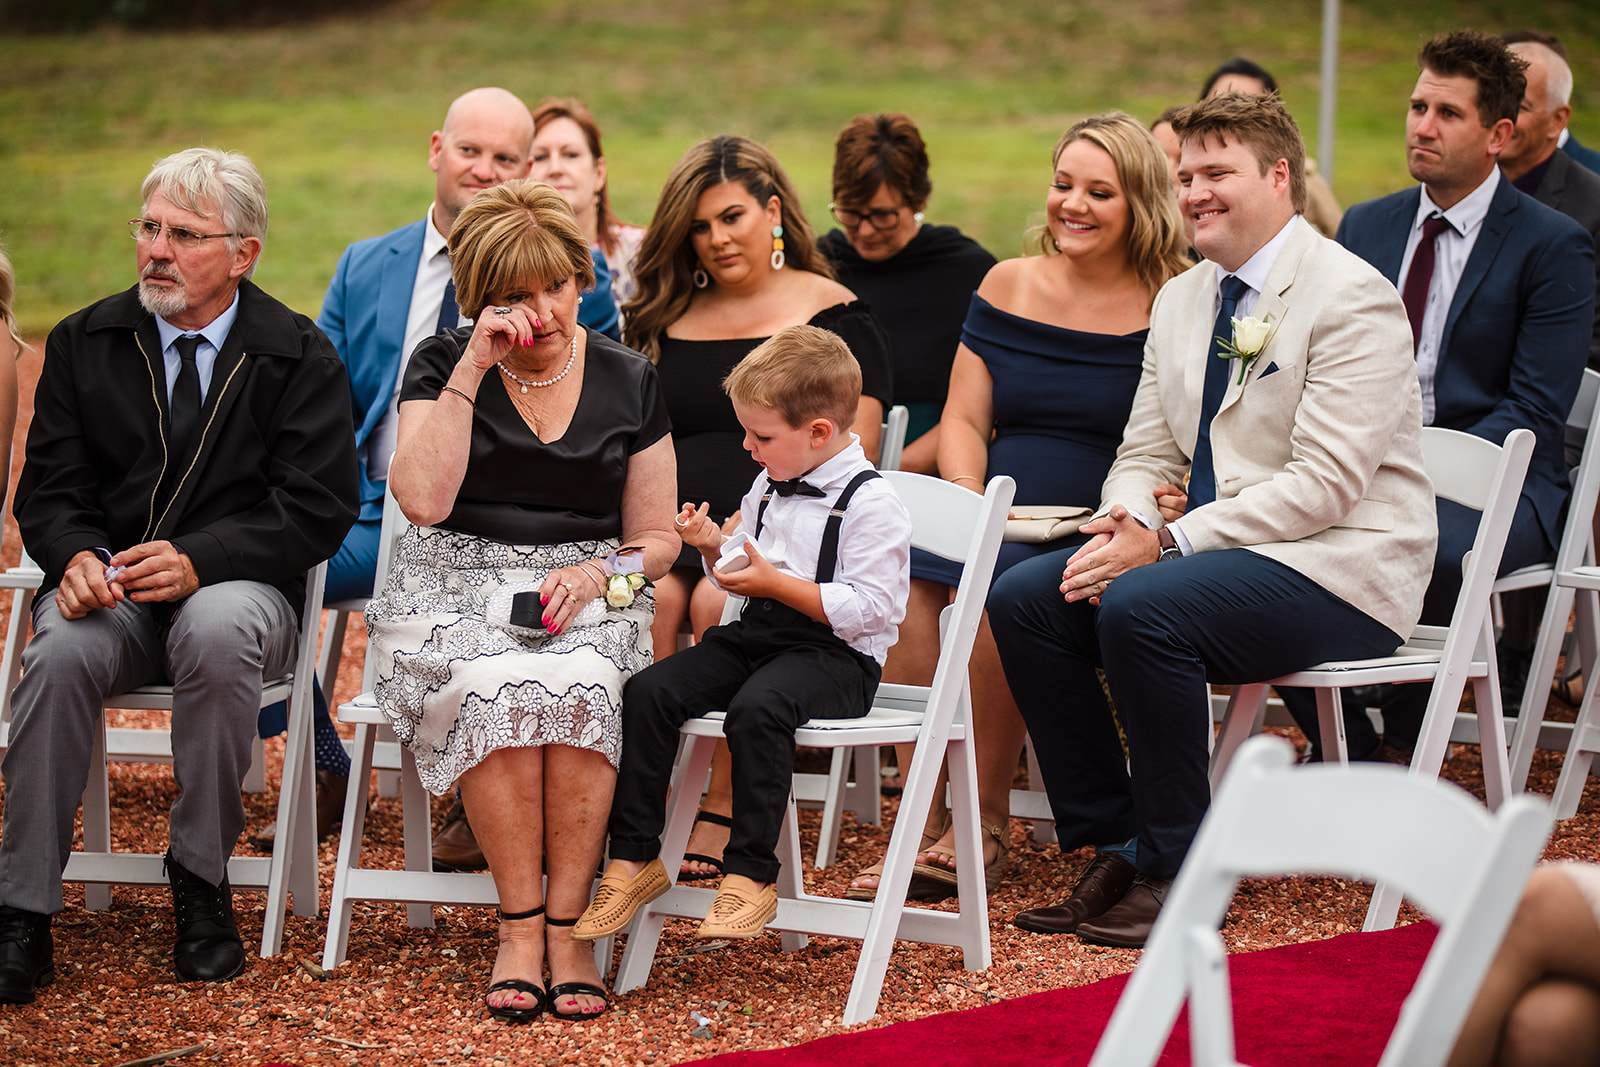 grooms mother tears up during ceremony